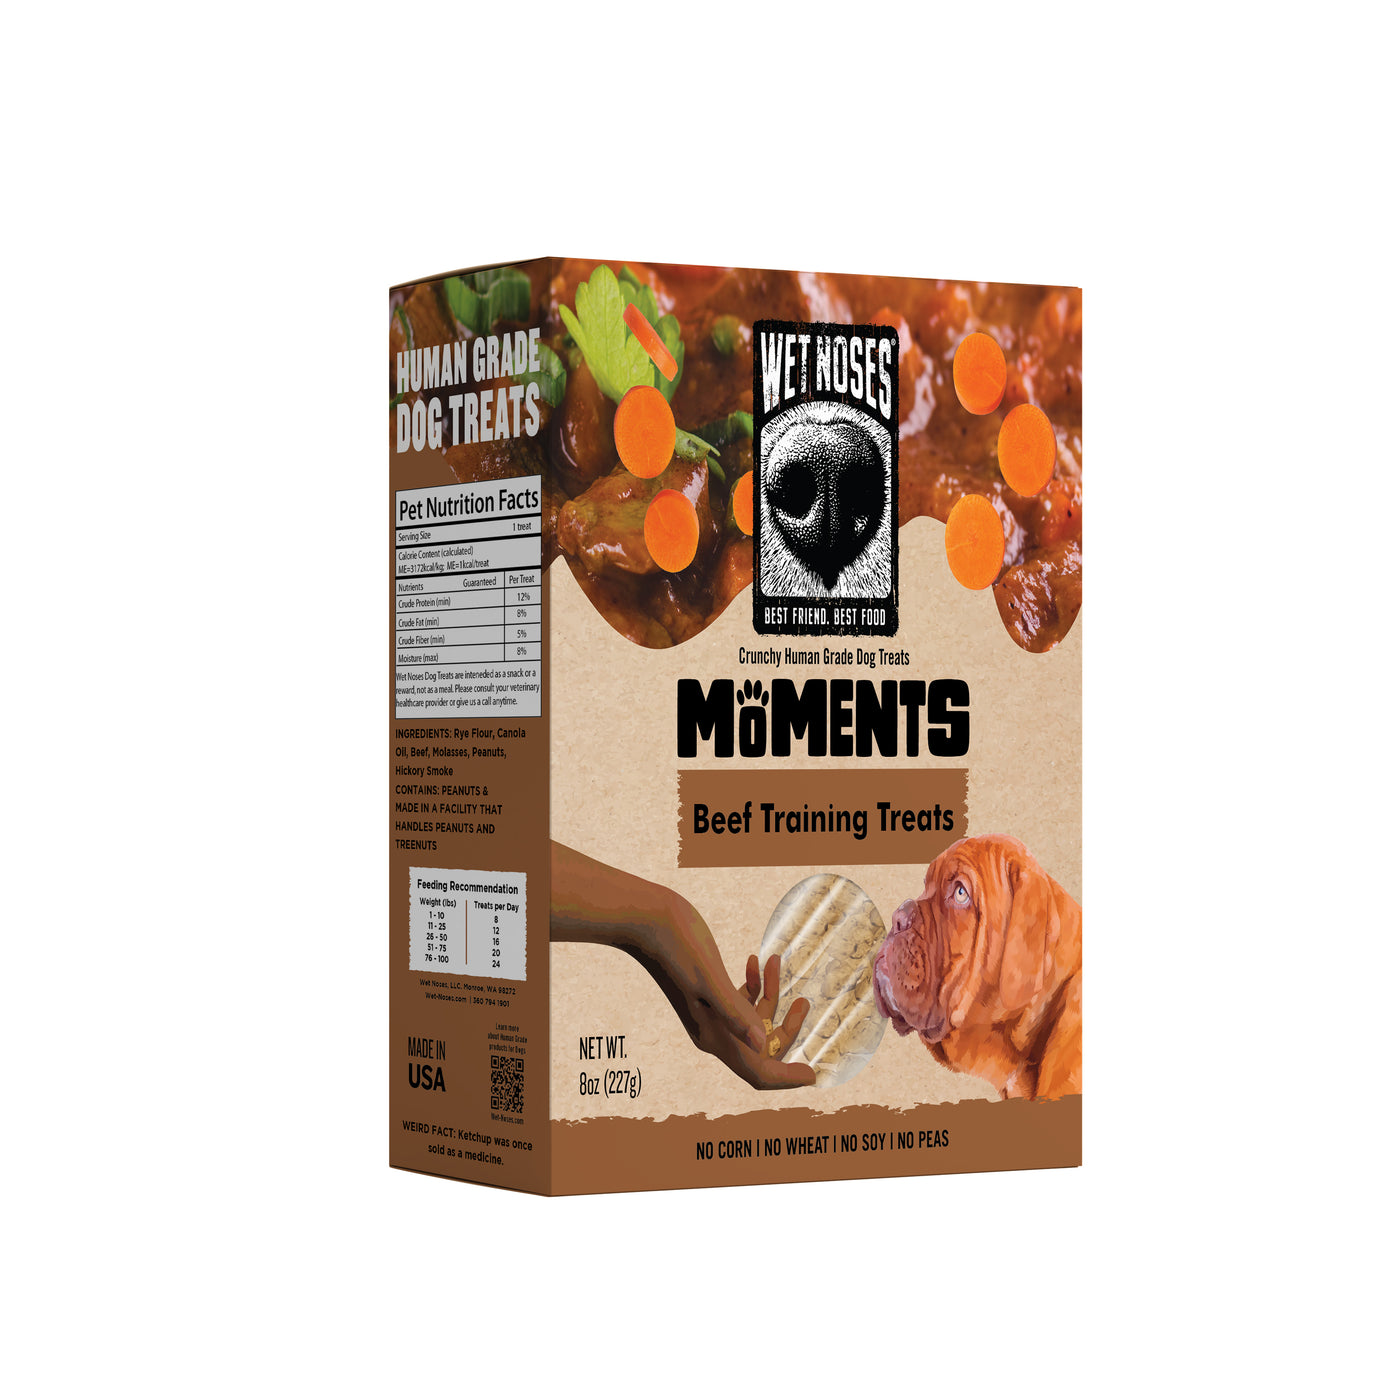 Moments Beef Training Treats 8oz - Case of 8